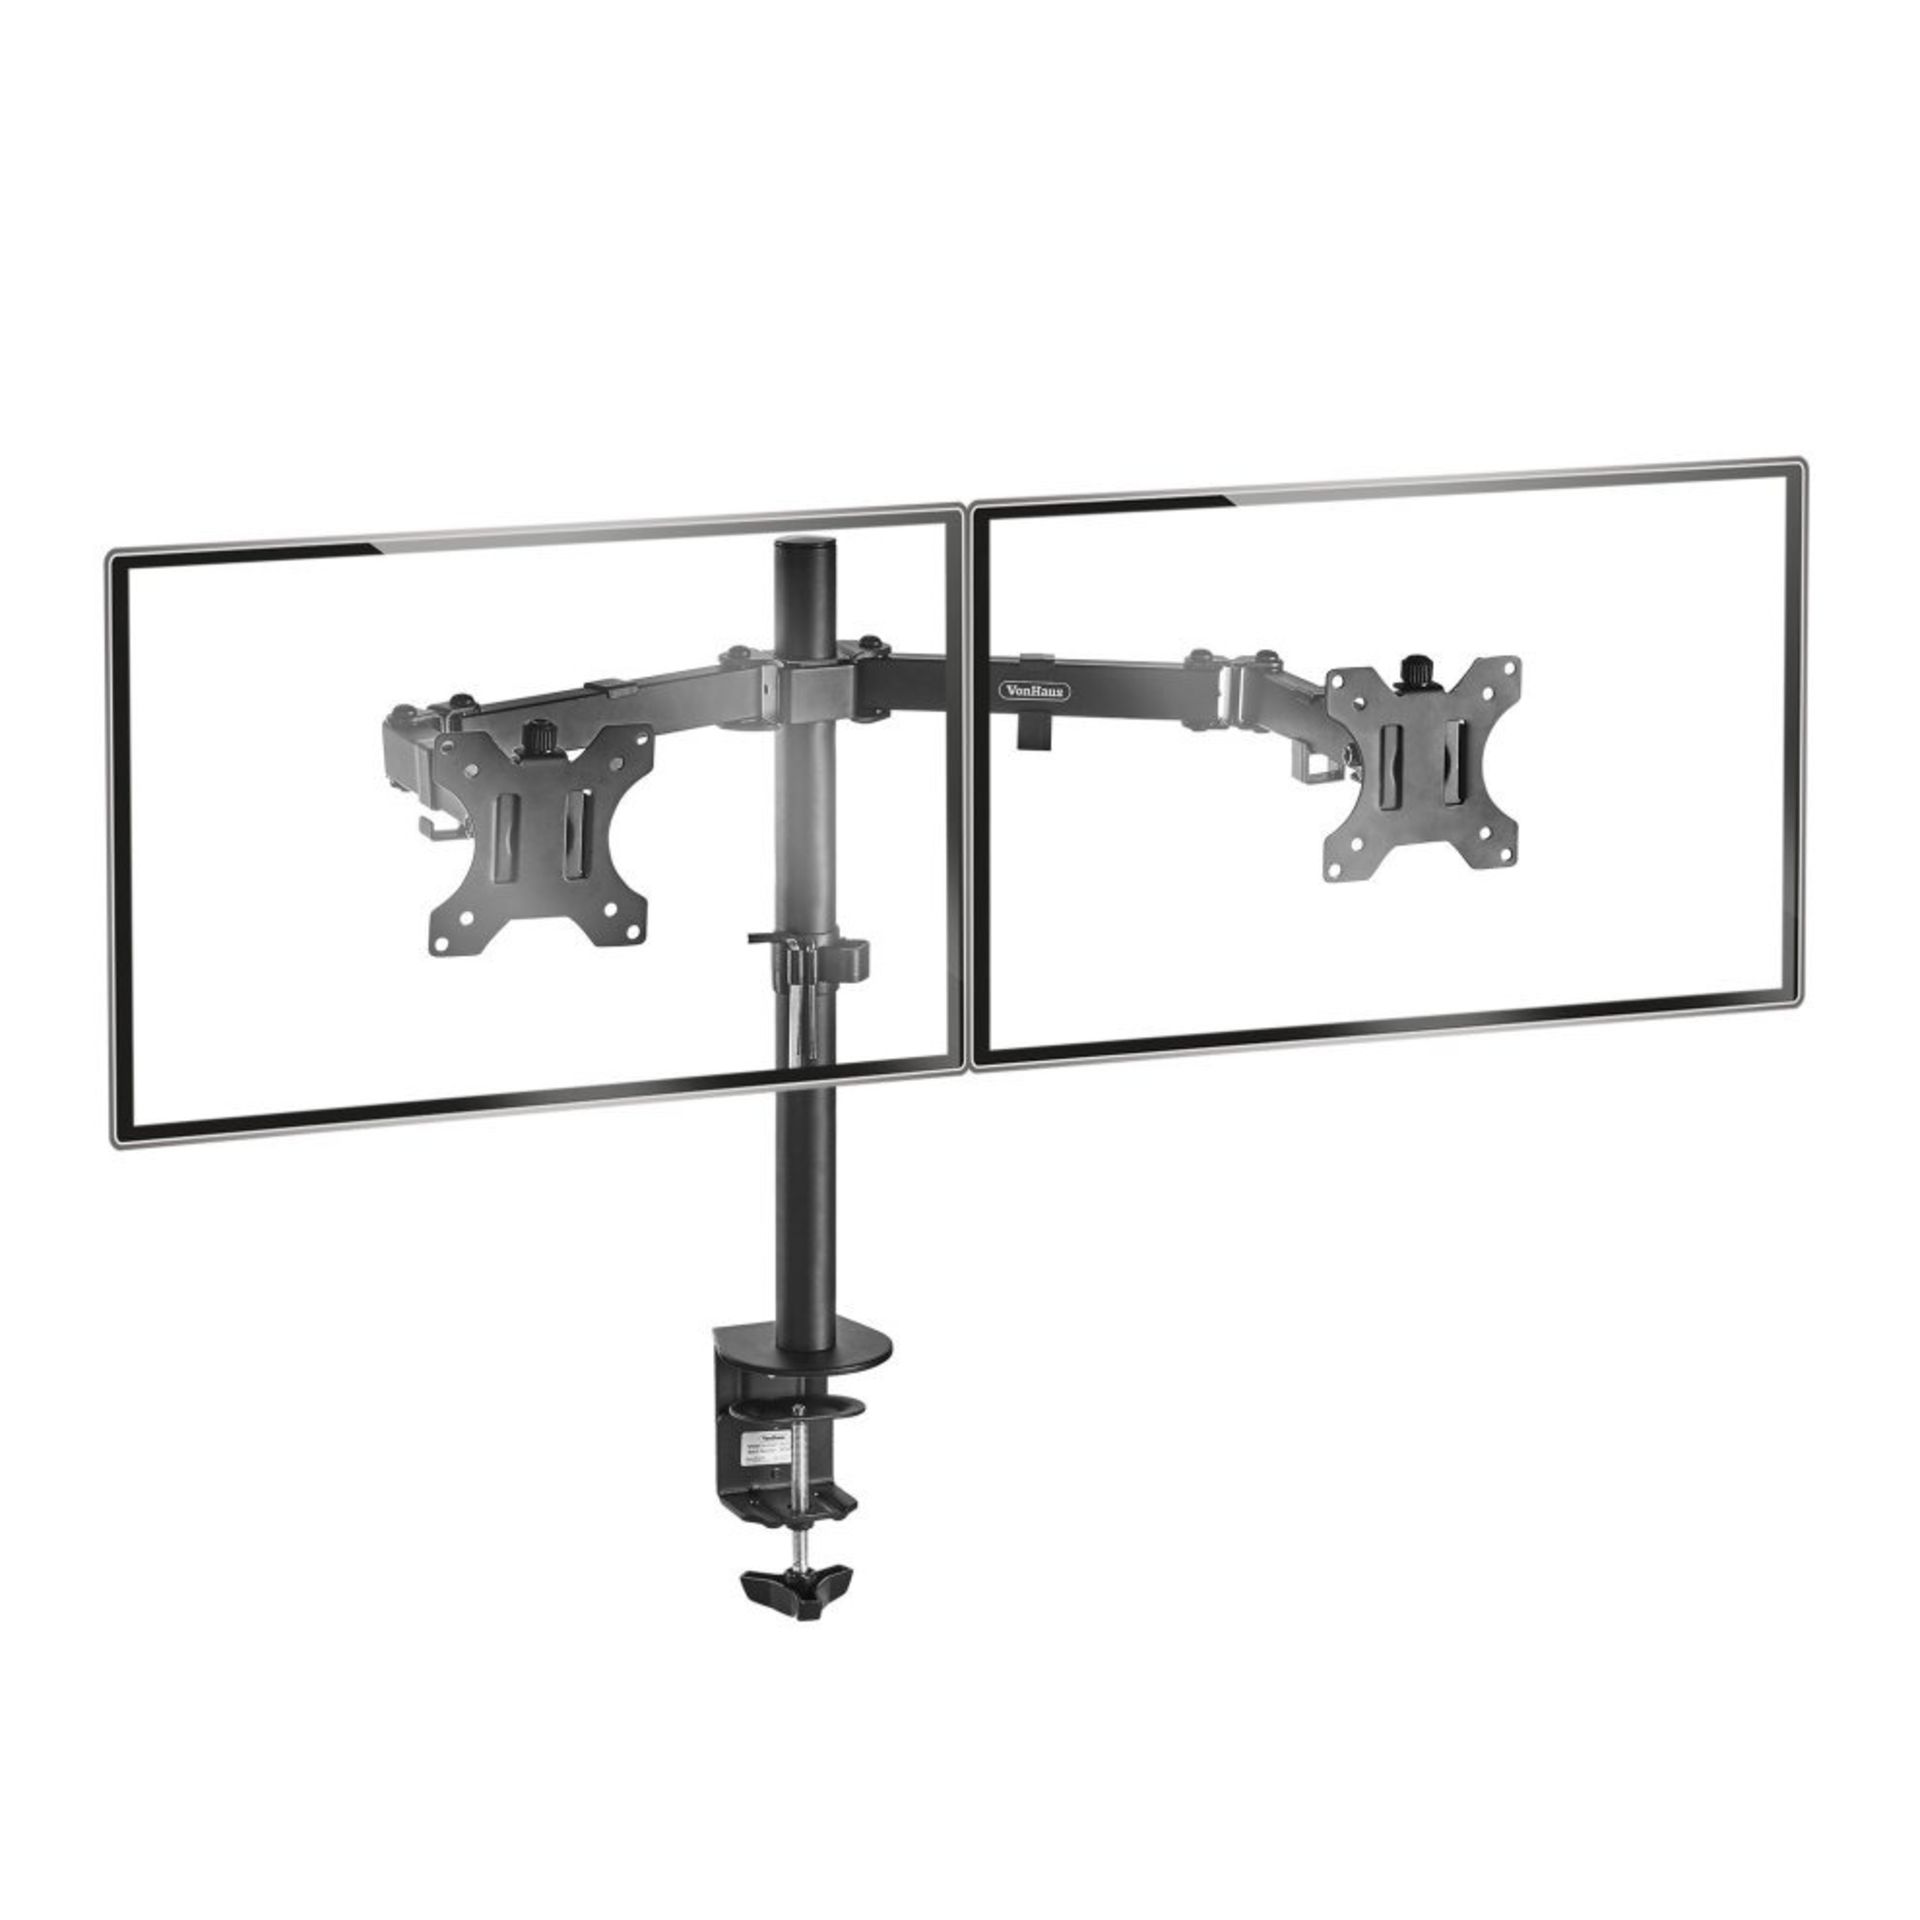 Dual Arm Desk Mount with Clamp - ER23B